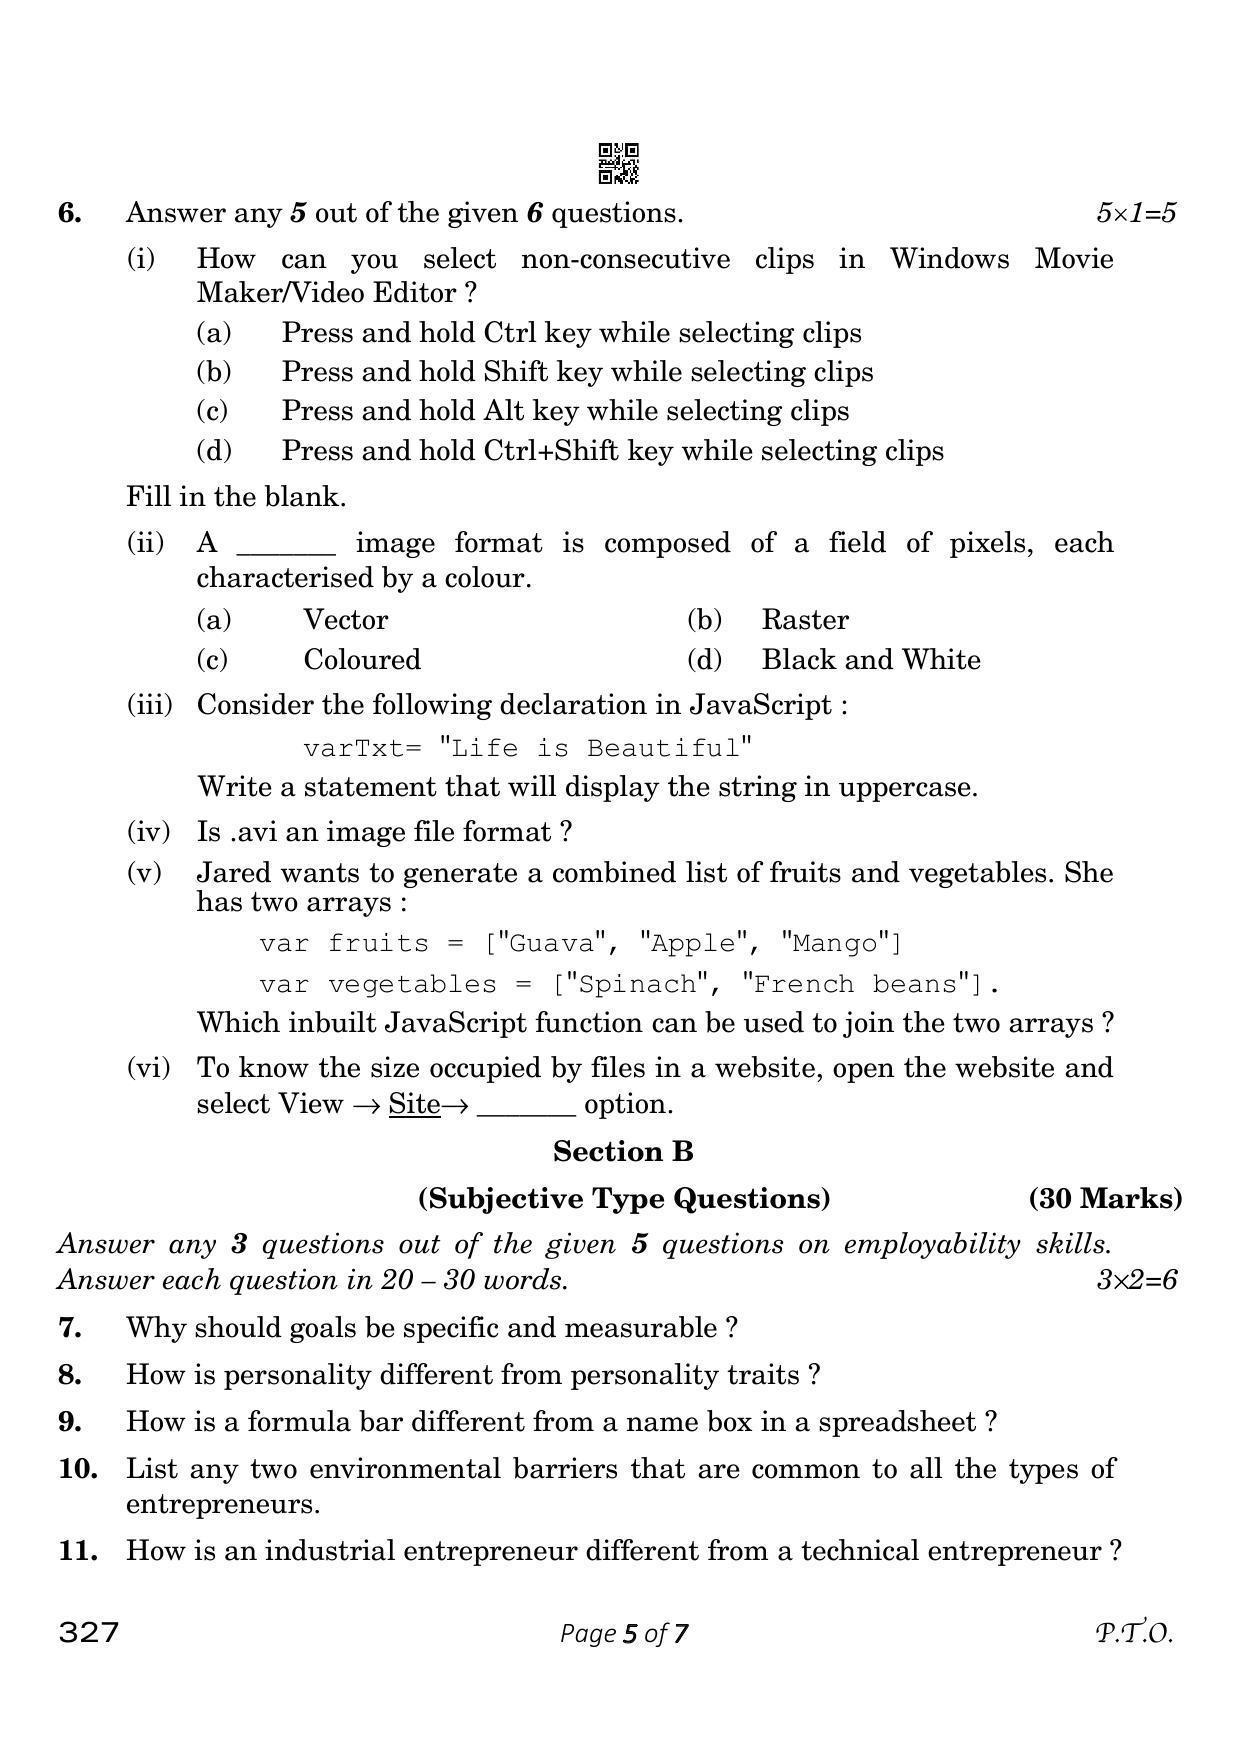 CBSE Class 12 327 Web Applications 2023 Question Paper - Page 5